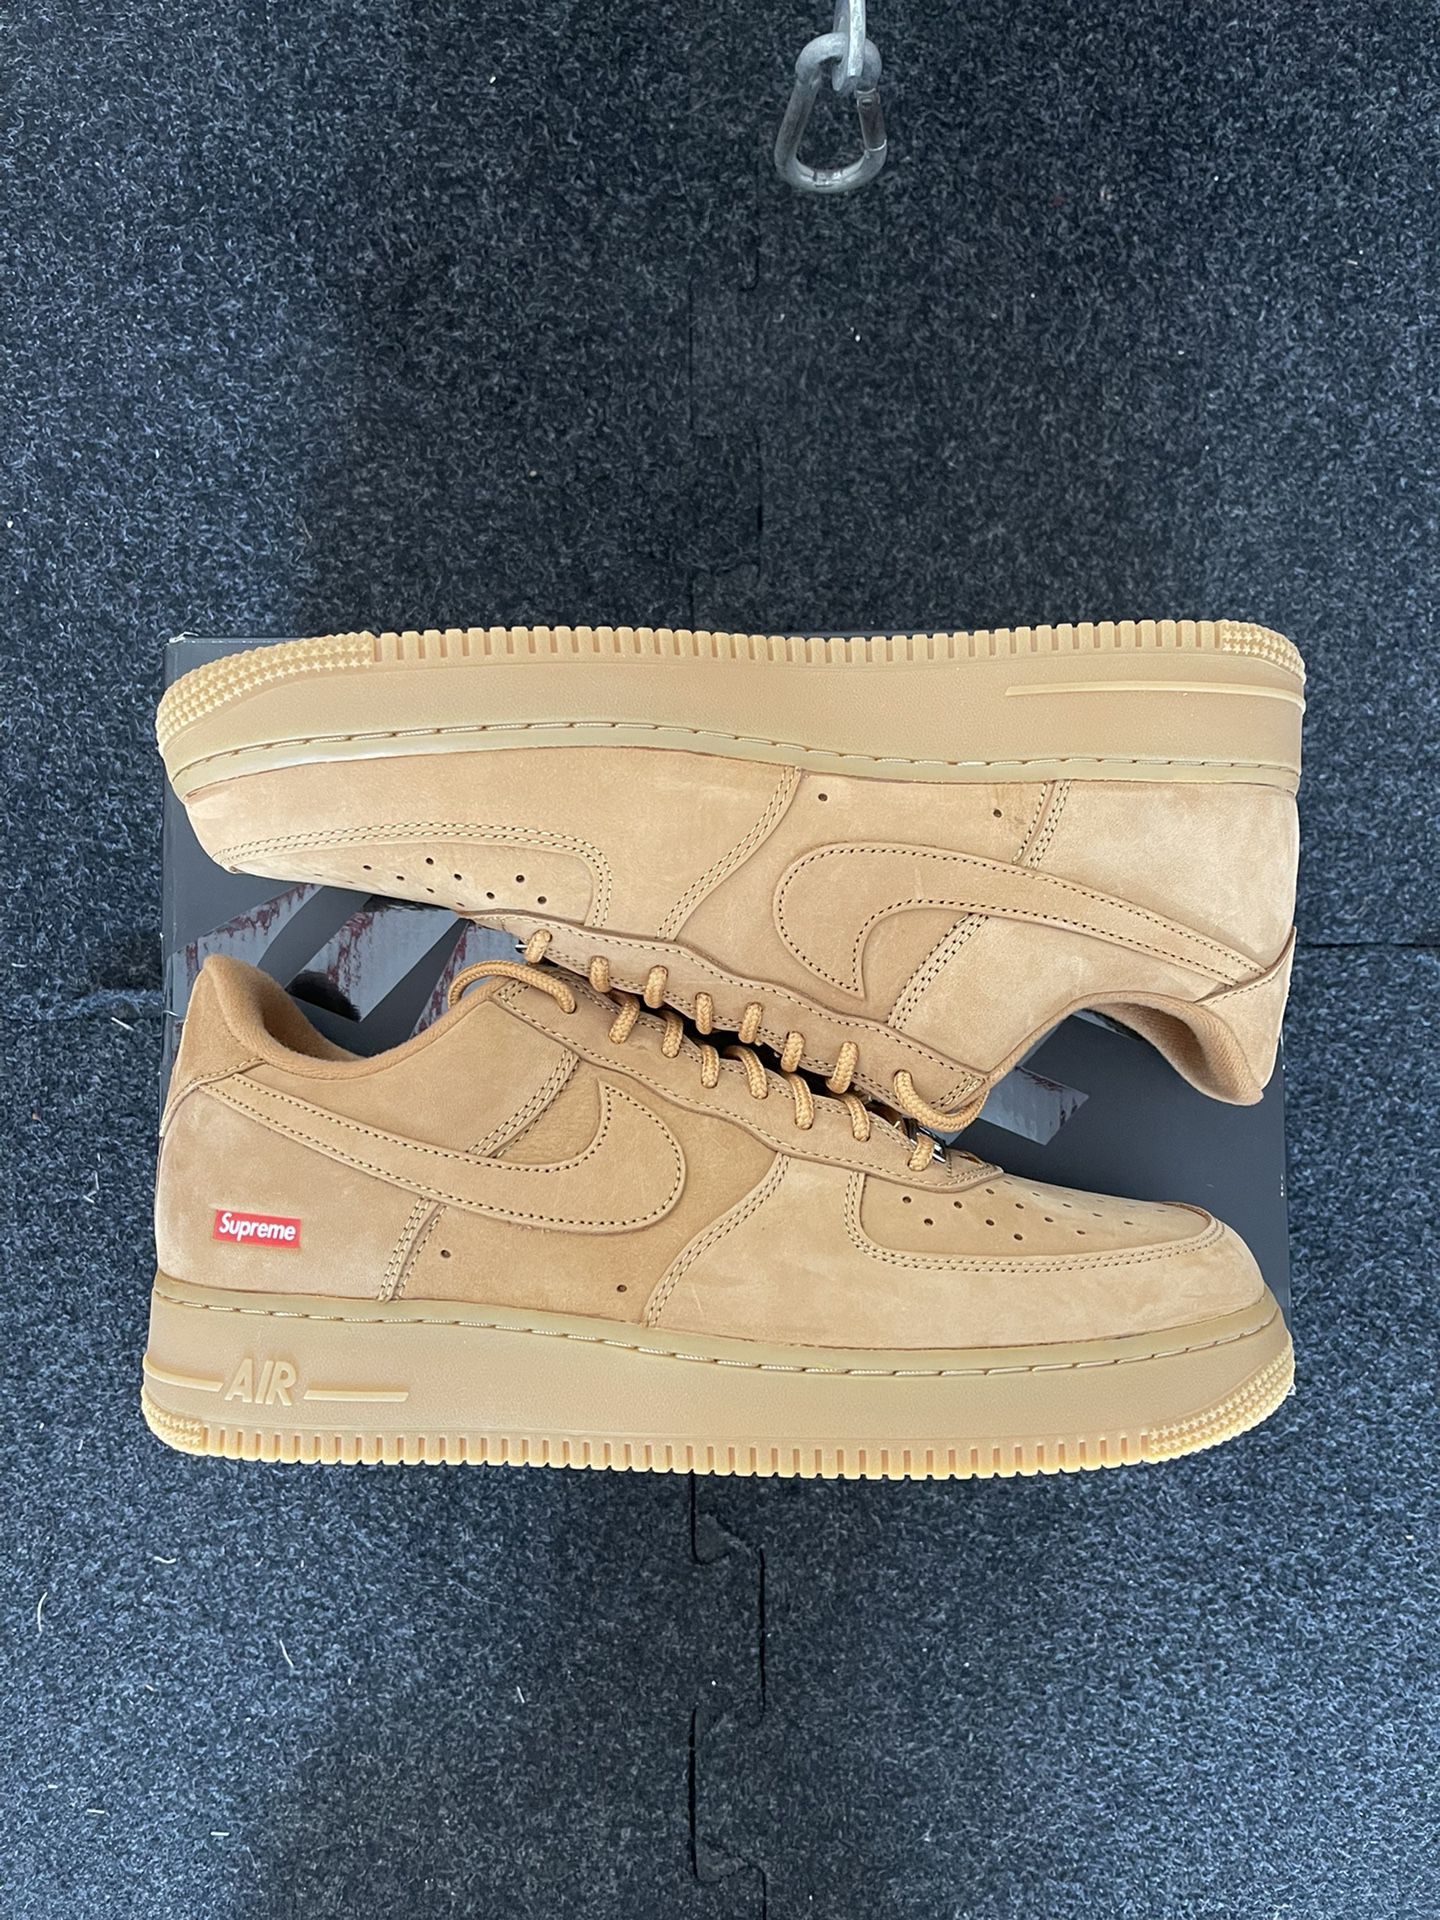 Nike Nike Air Force 1 Low Supreme Wheat  Size 12 Available For Immediate  Sale At Sotheby's